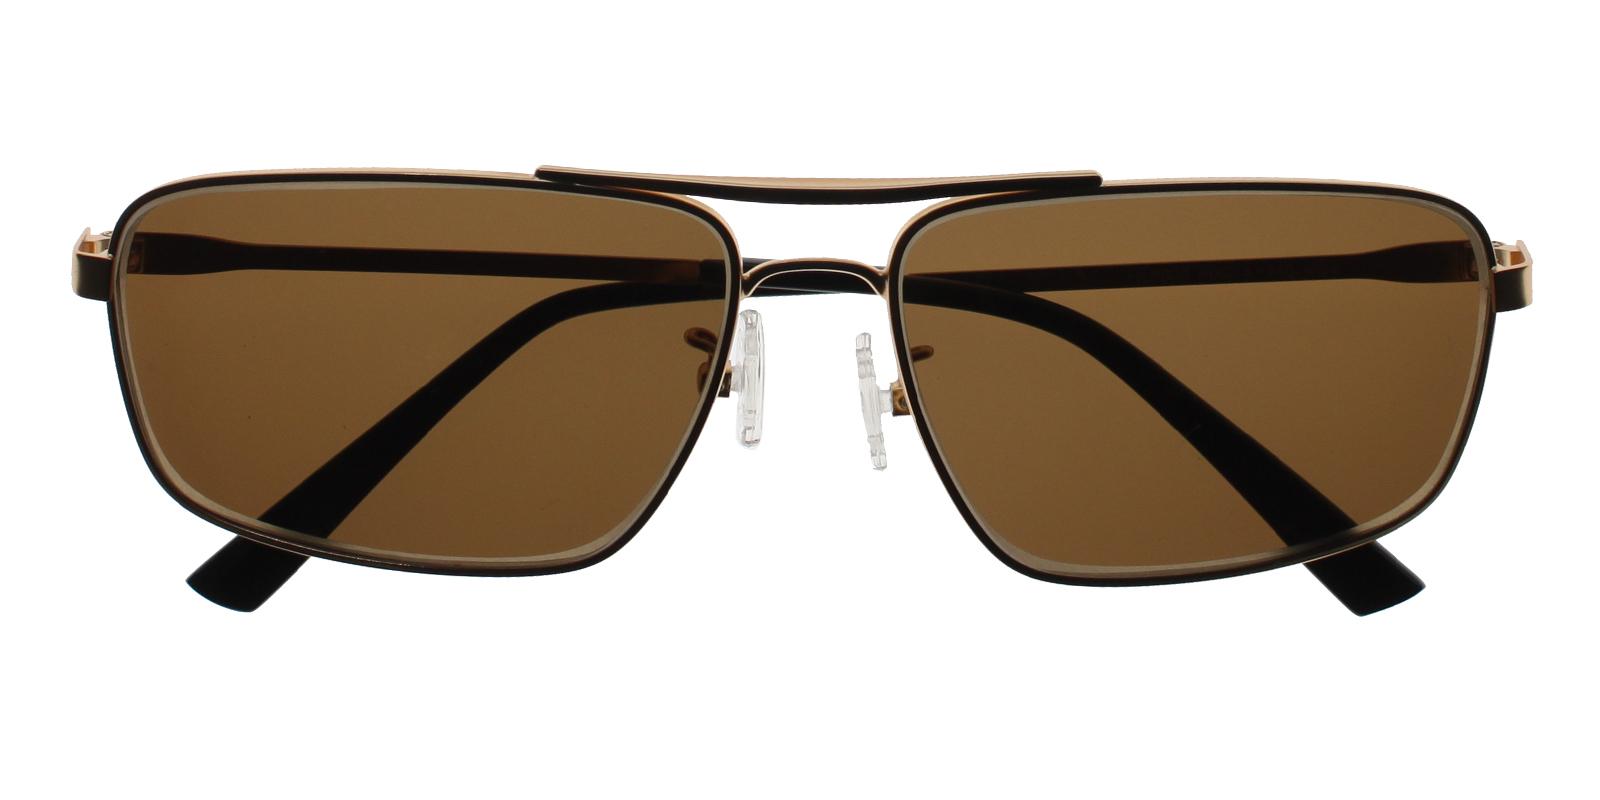 Ethan Gold Metal NosePads , Sunglasses Frames from ABBE Glasses